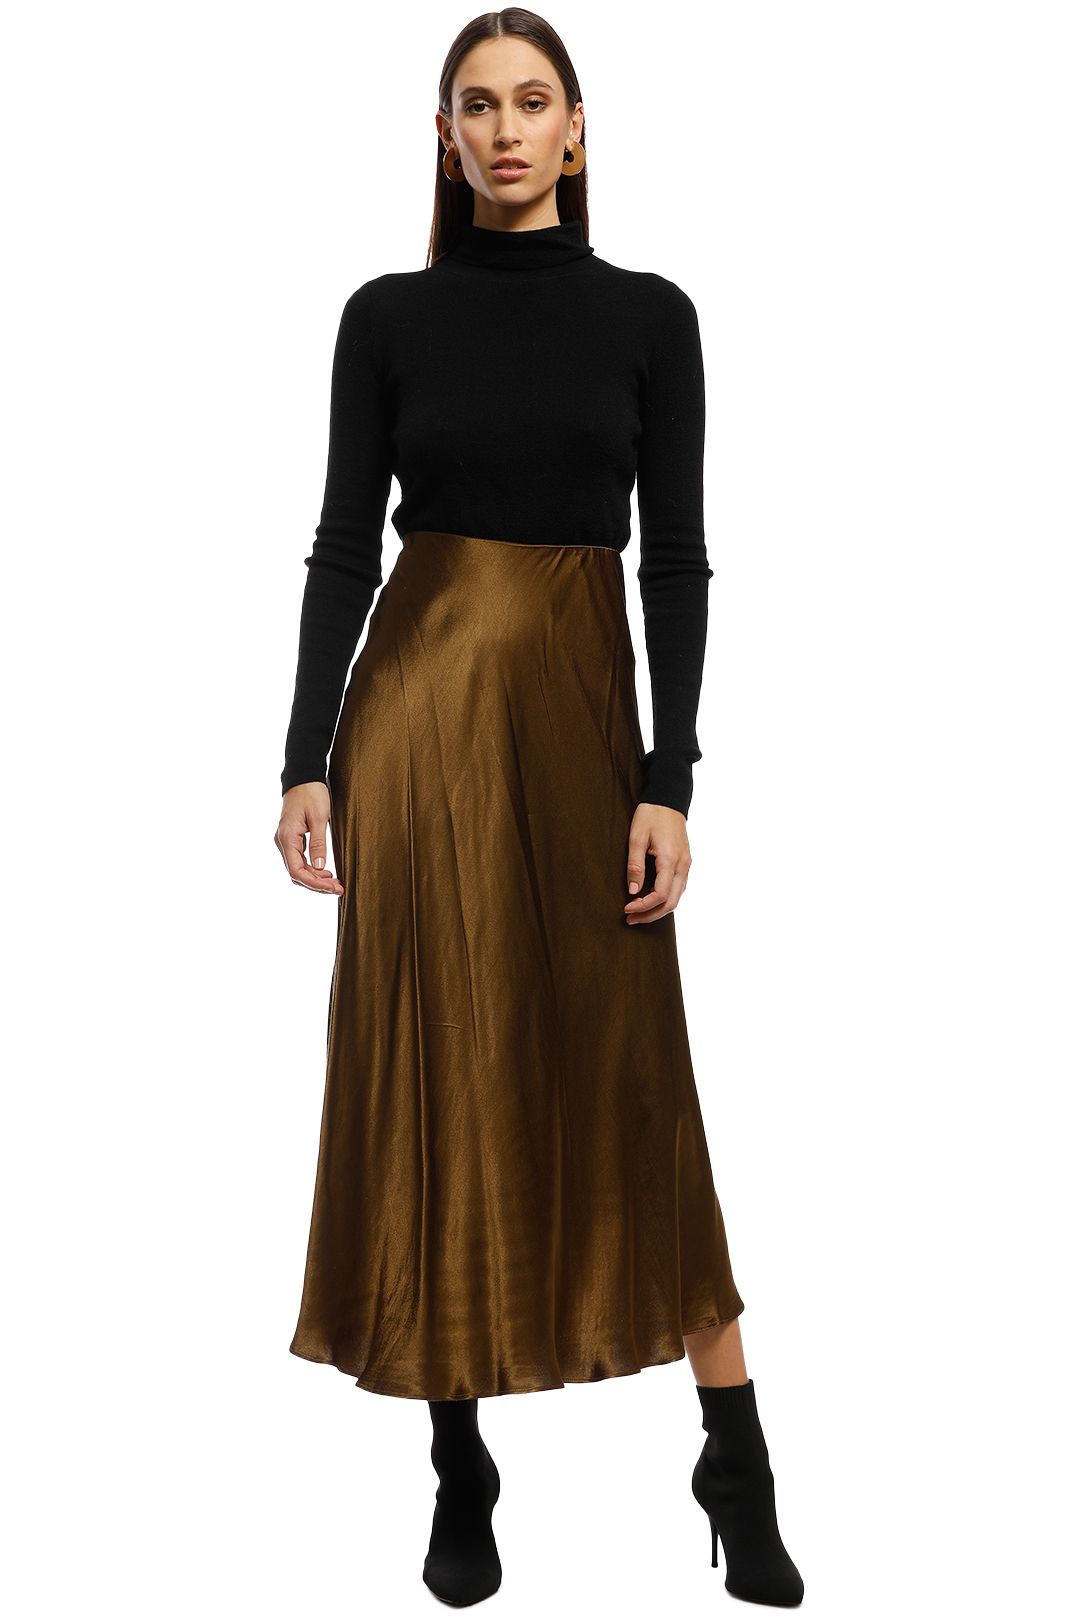 AKIN by Ginger & Smart - Grove Skirt - Brown - Front